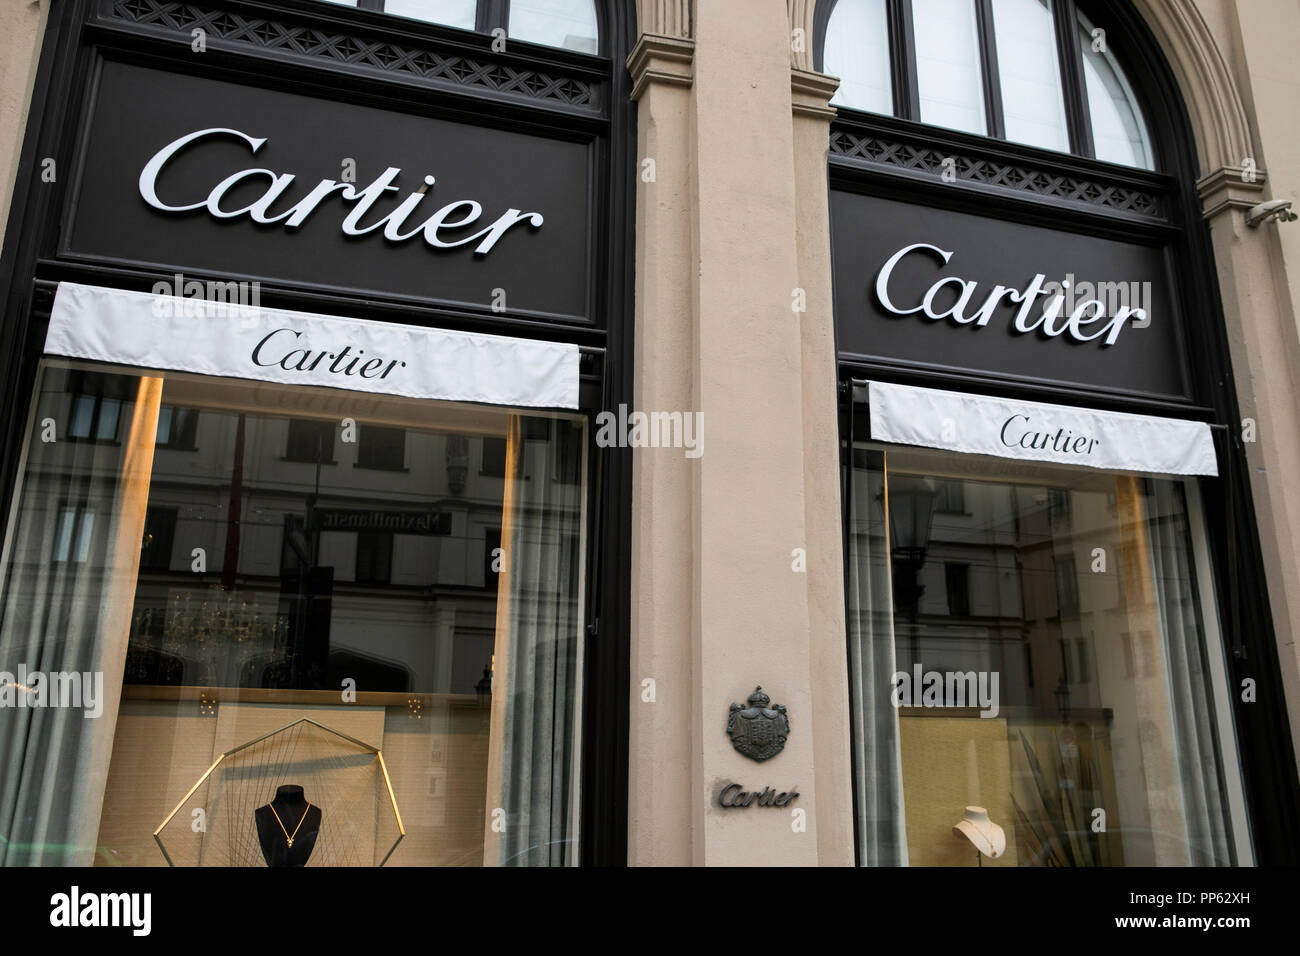 Cartier retail store in Munich, Germany 